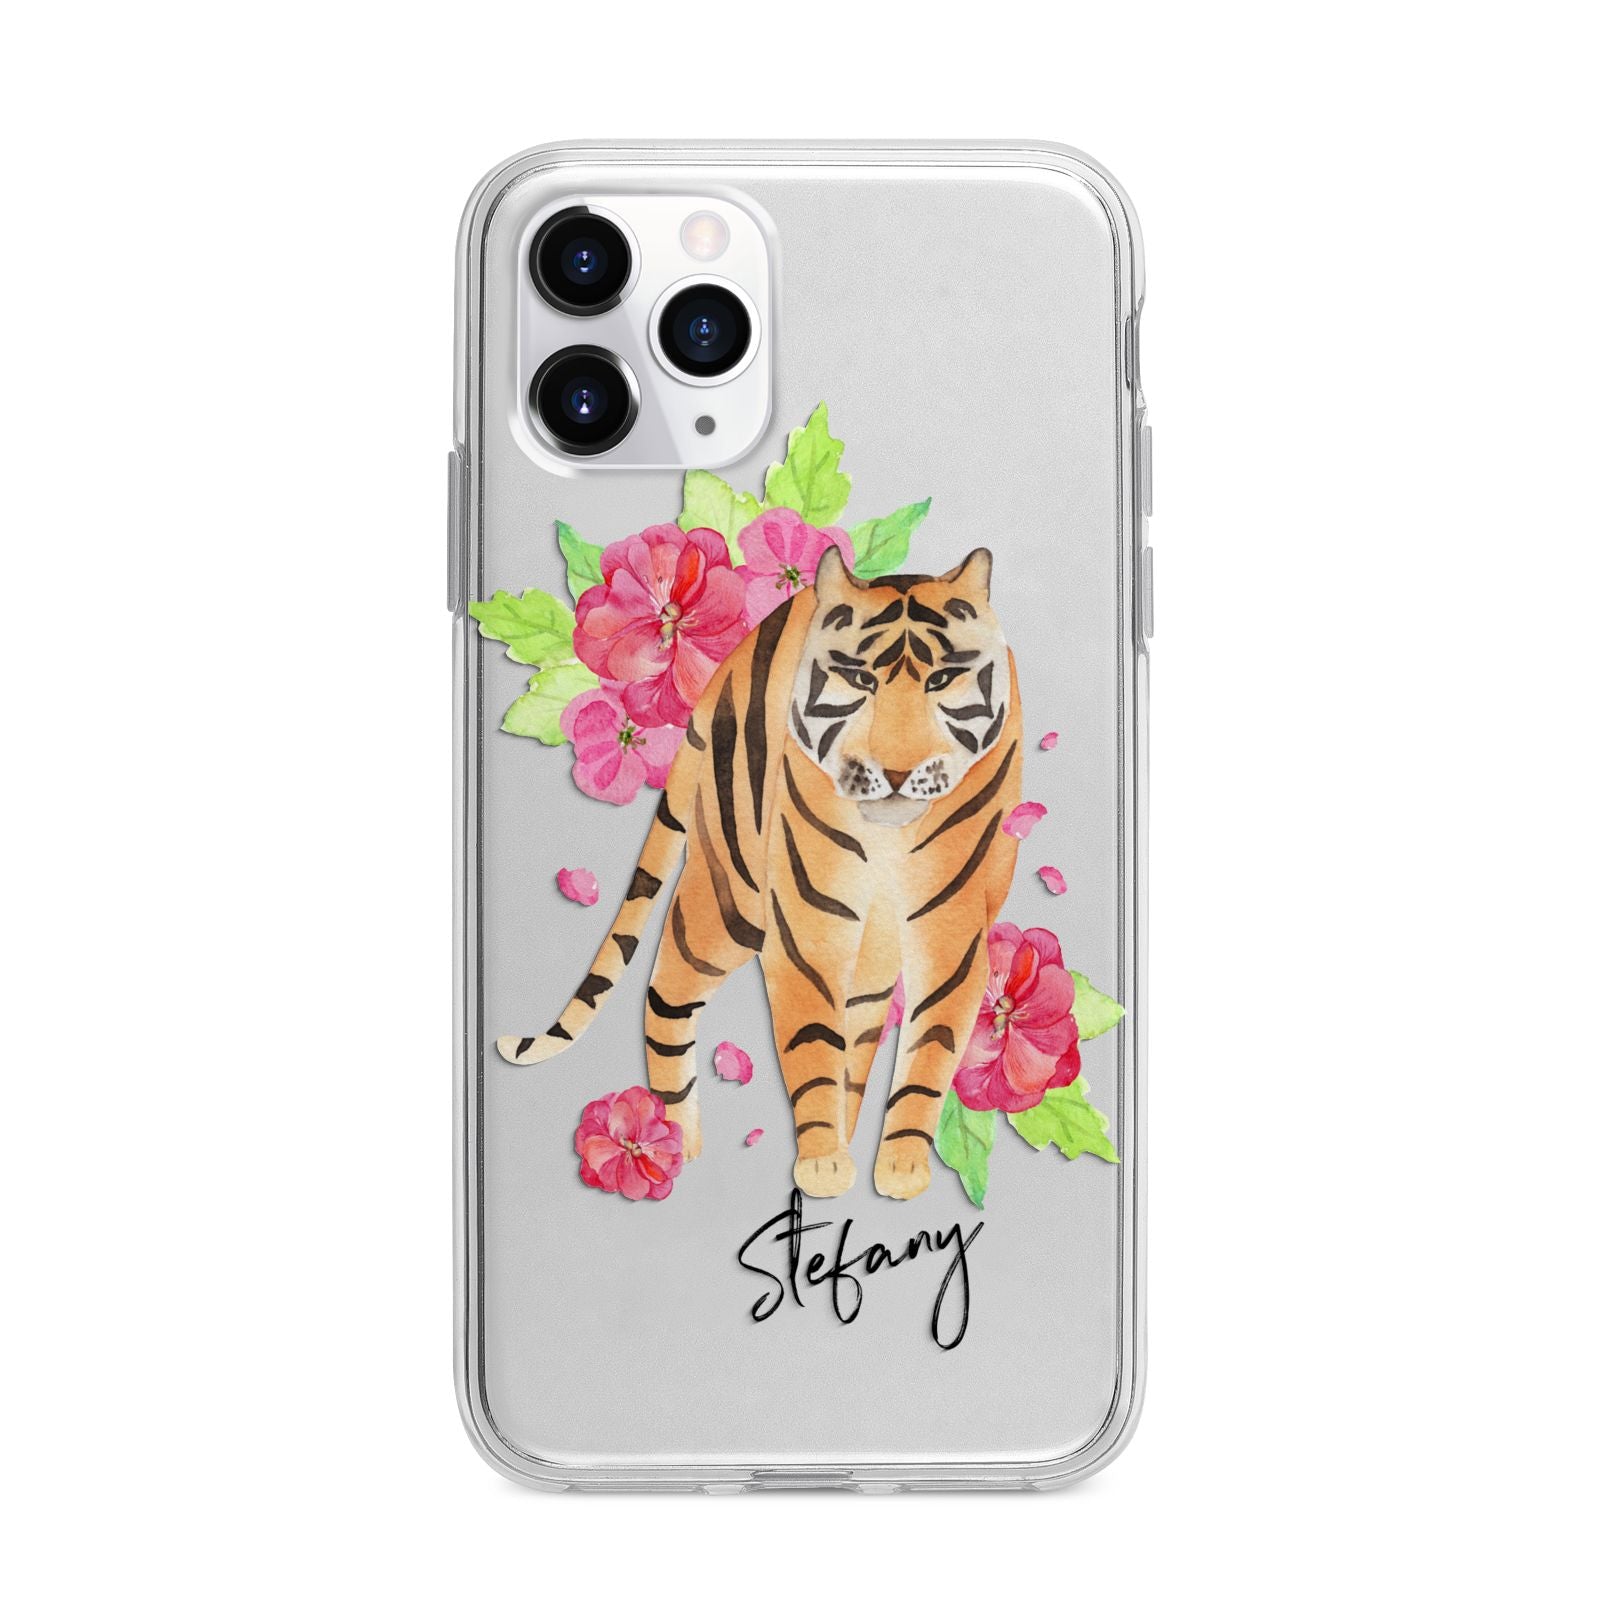 Personalised Tiger Apple iPhone 11 Pro Max in Silver with Bumper Case